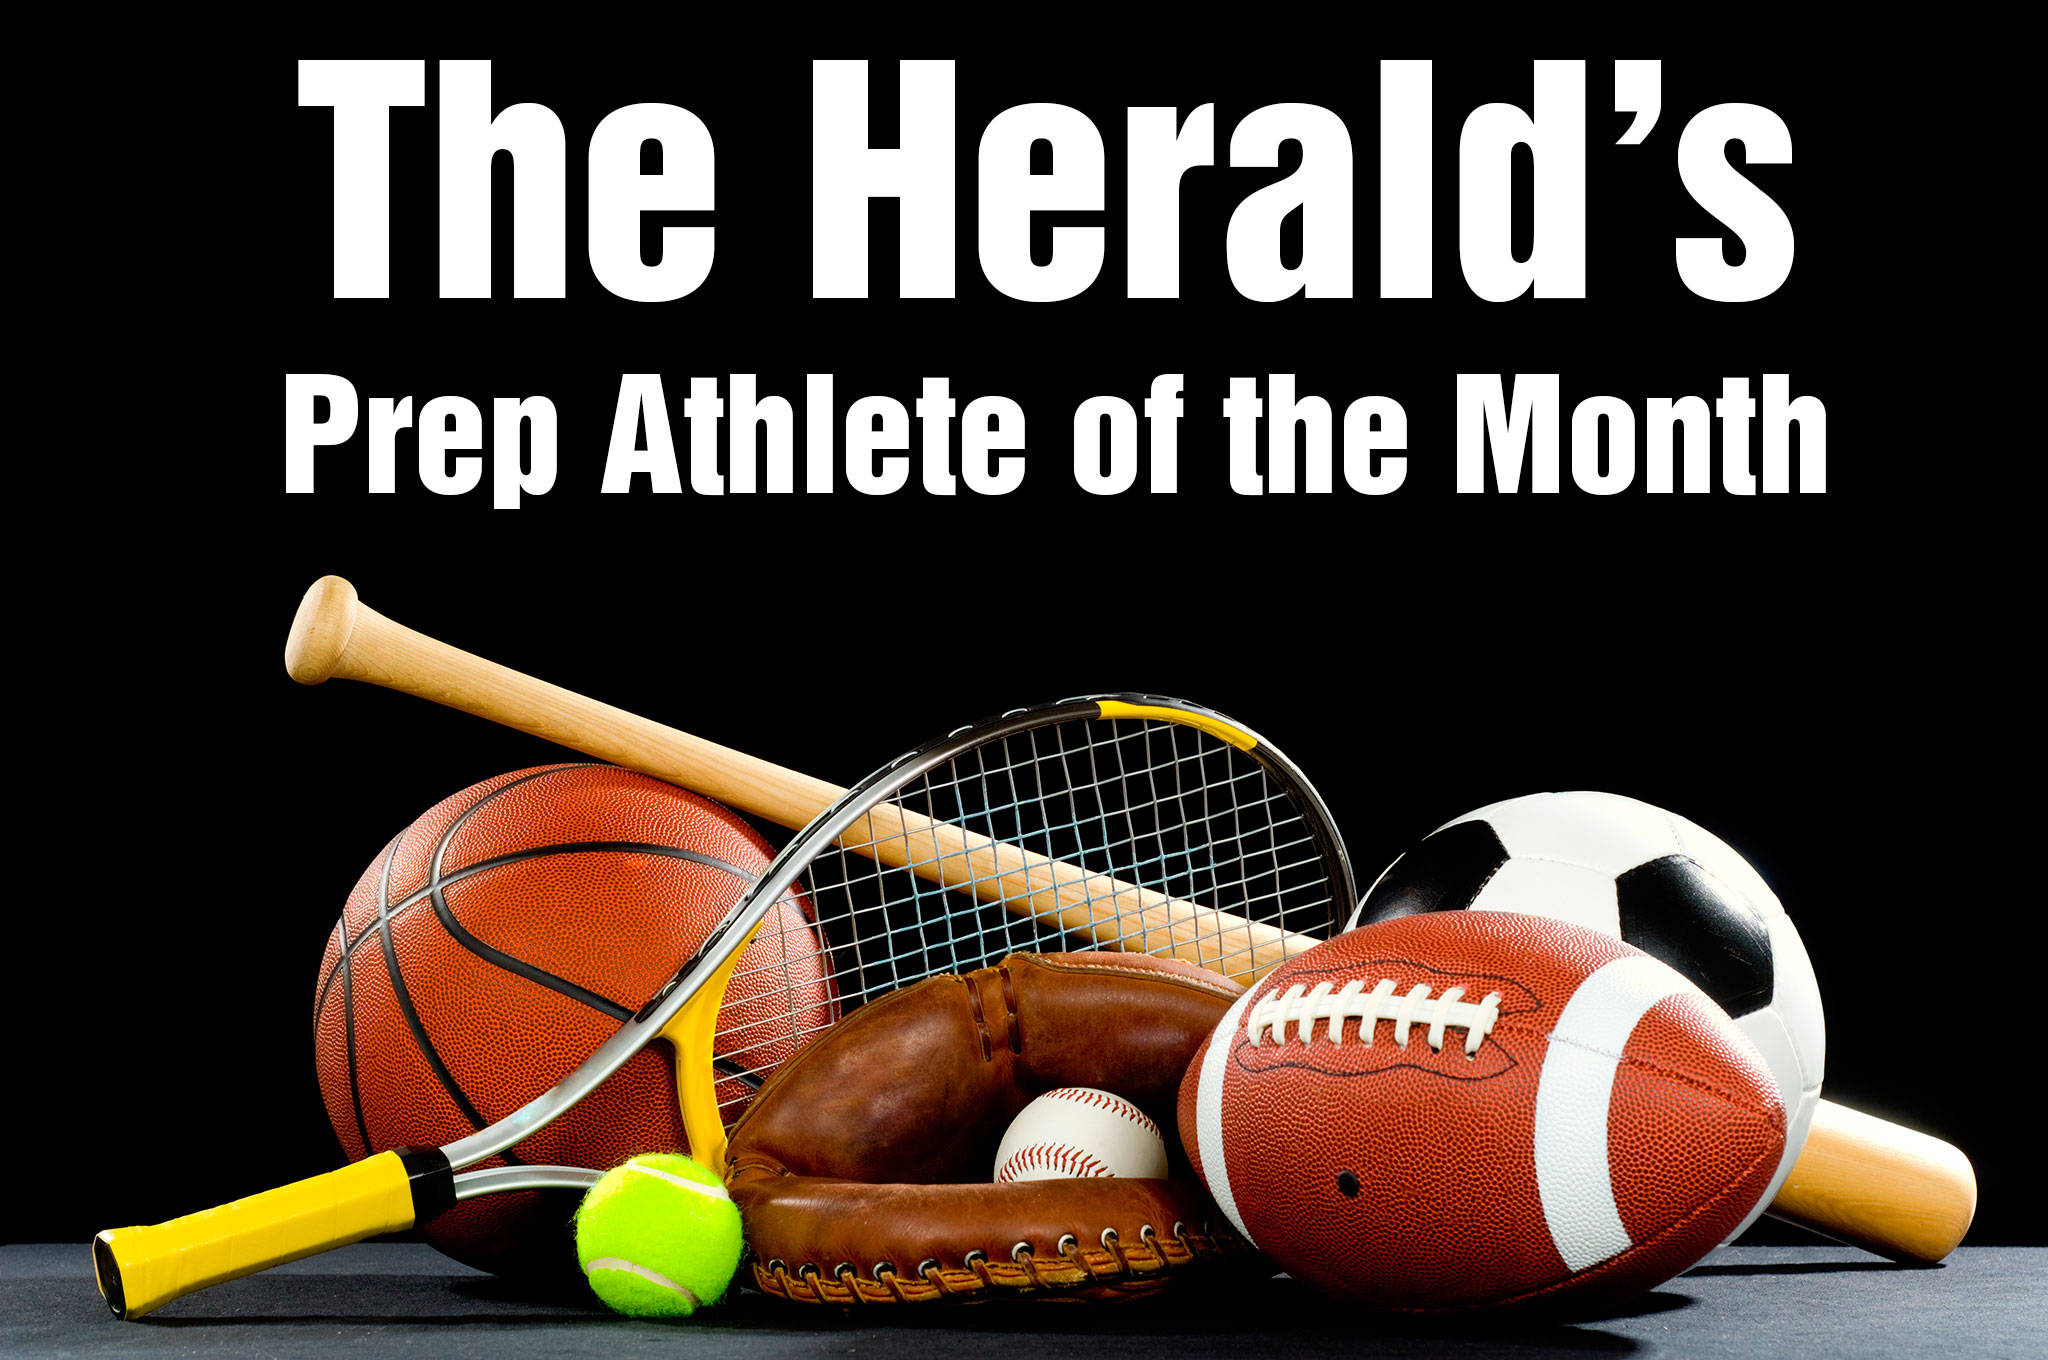 The Herald's Prep Athlete of the Month.